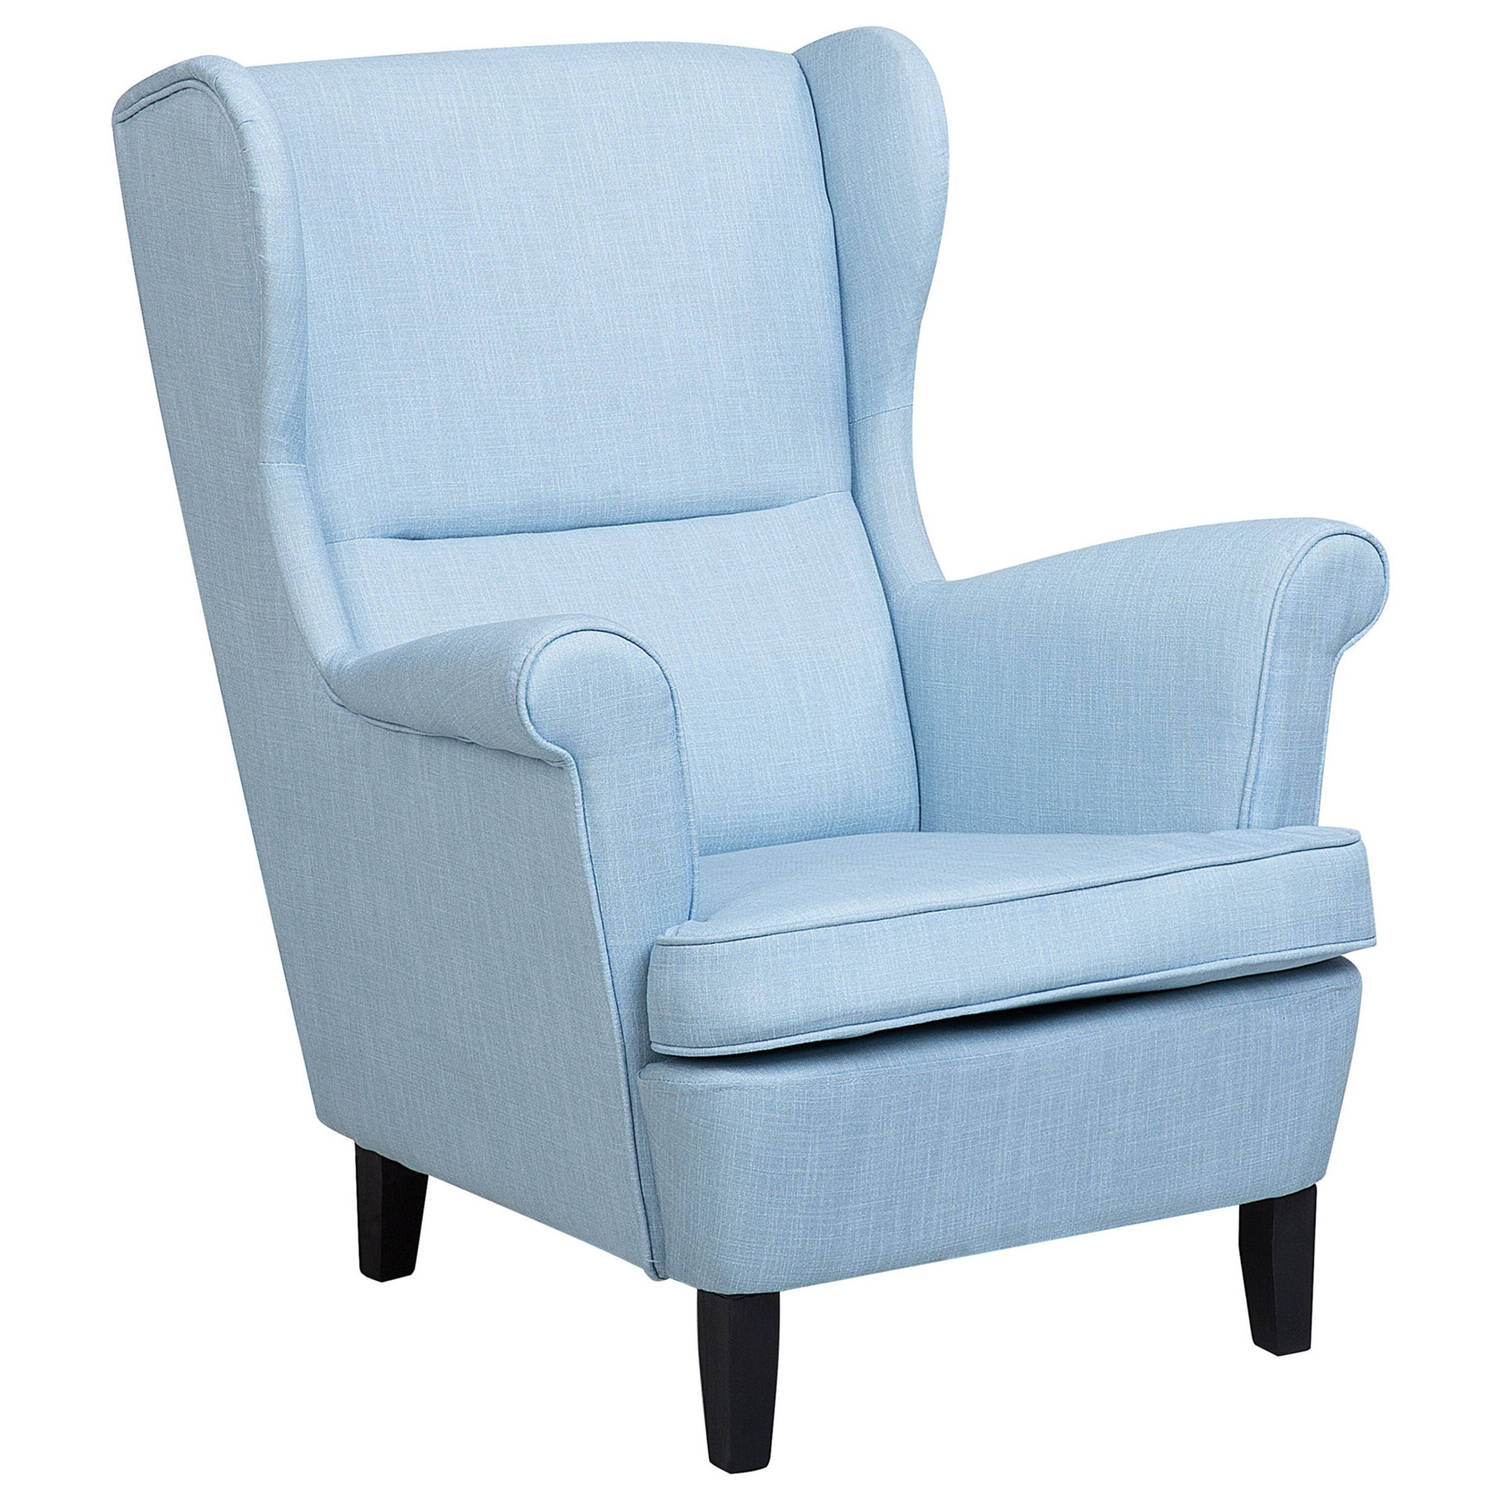 Beliani Abson Fauteuil Blauw polyester